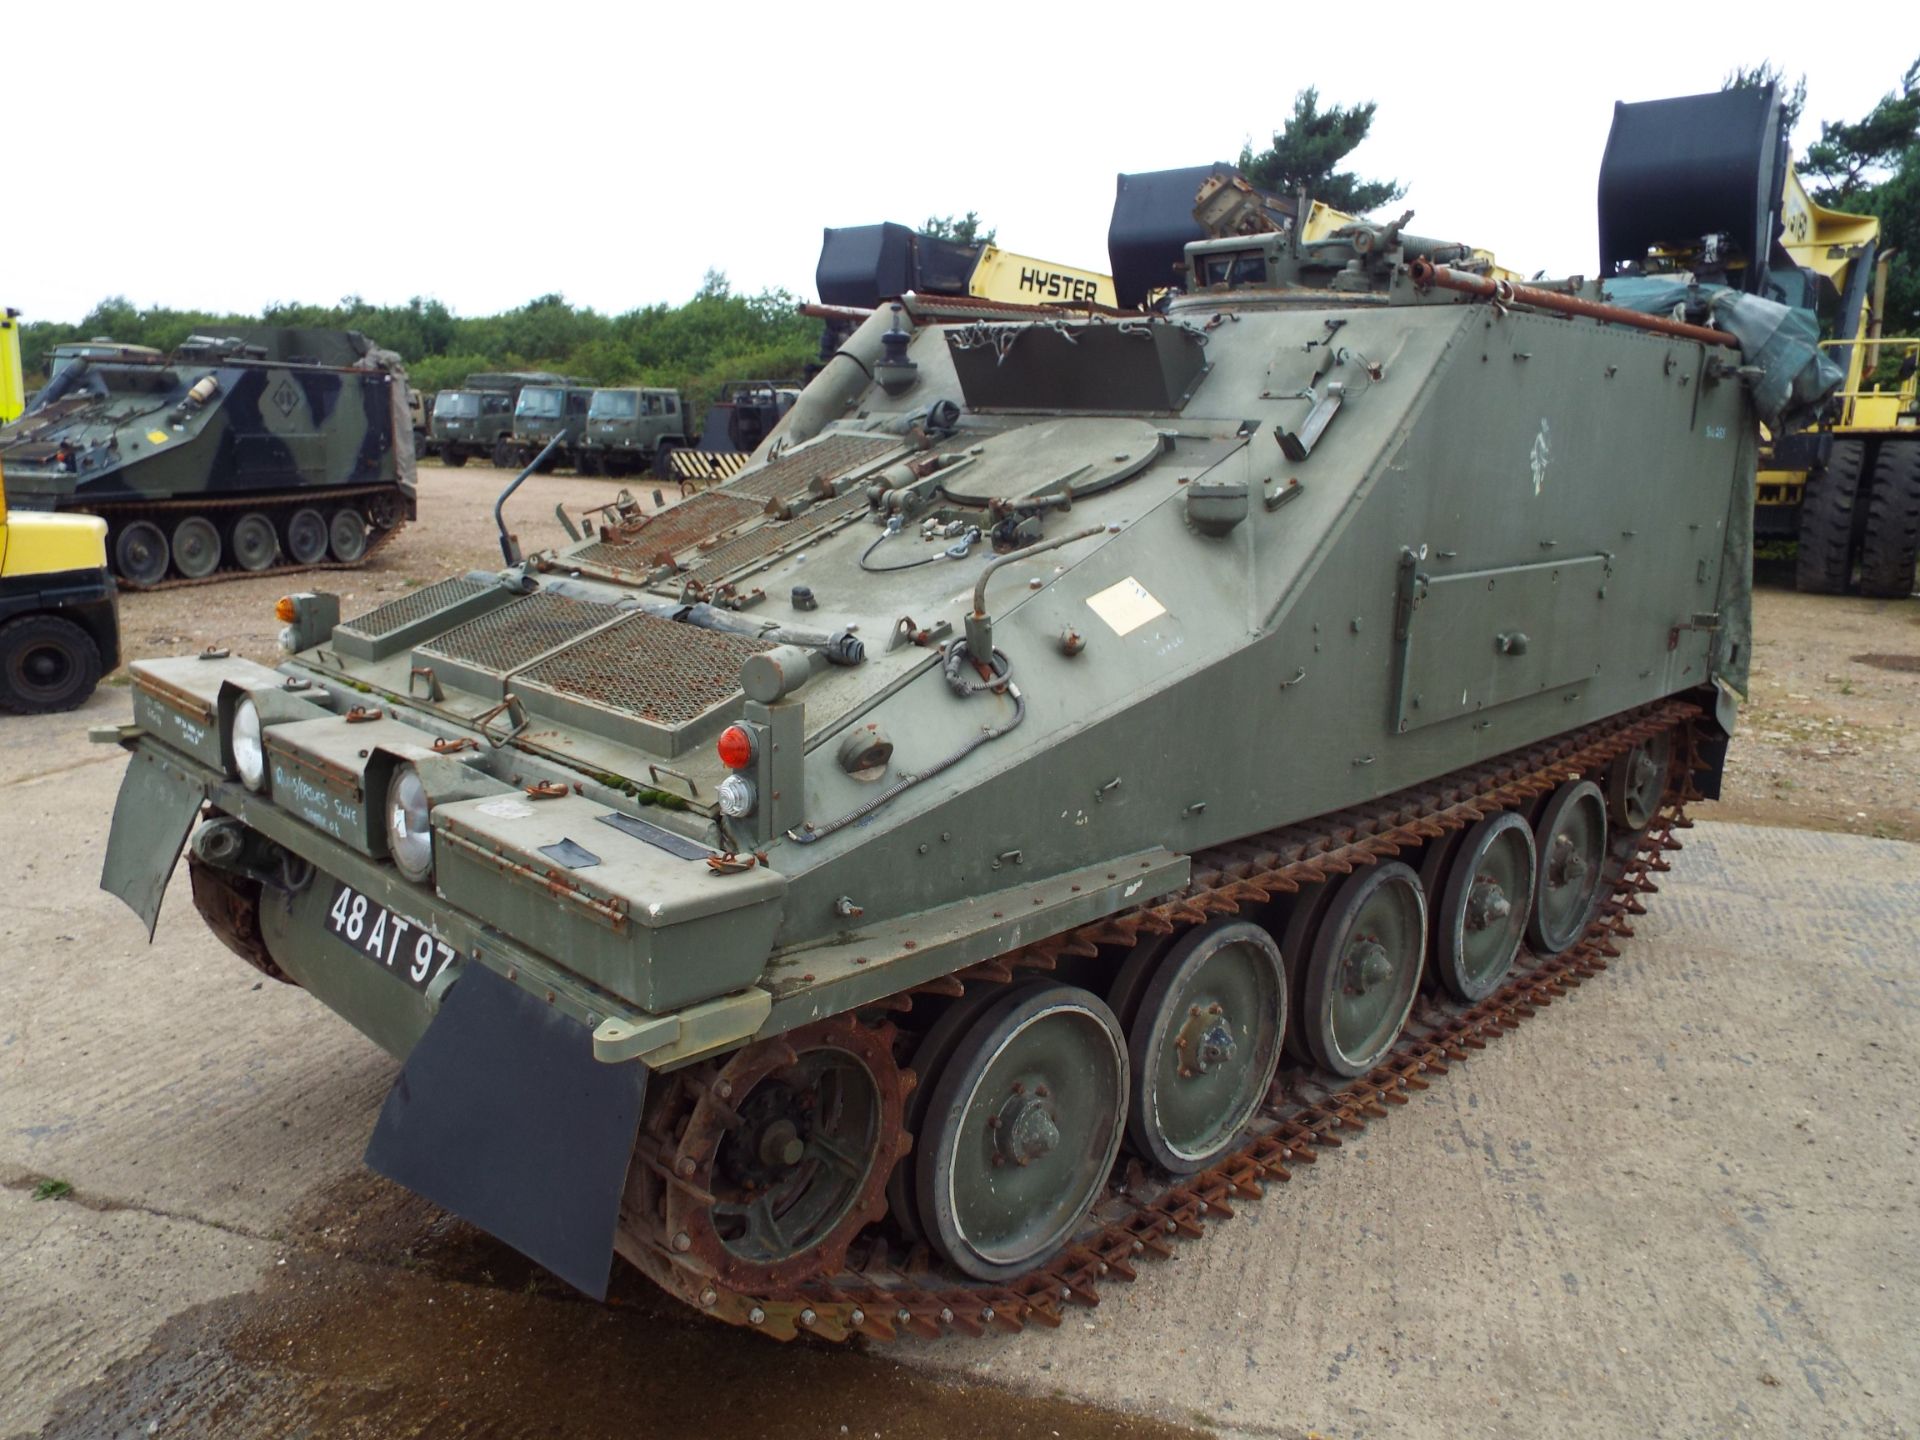 CVRT (Combat Vehicle Reconnaissance Tracked) FV105 Sultan Armoured Personnel Carrier - Image 3 of 30